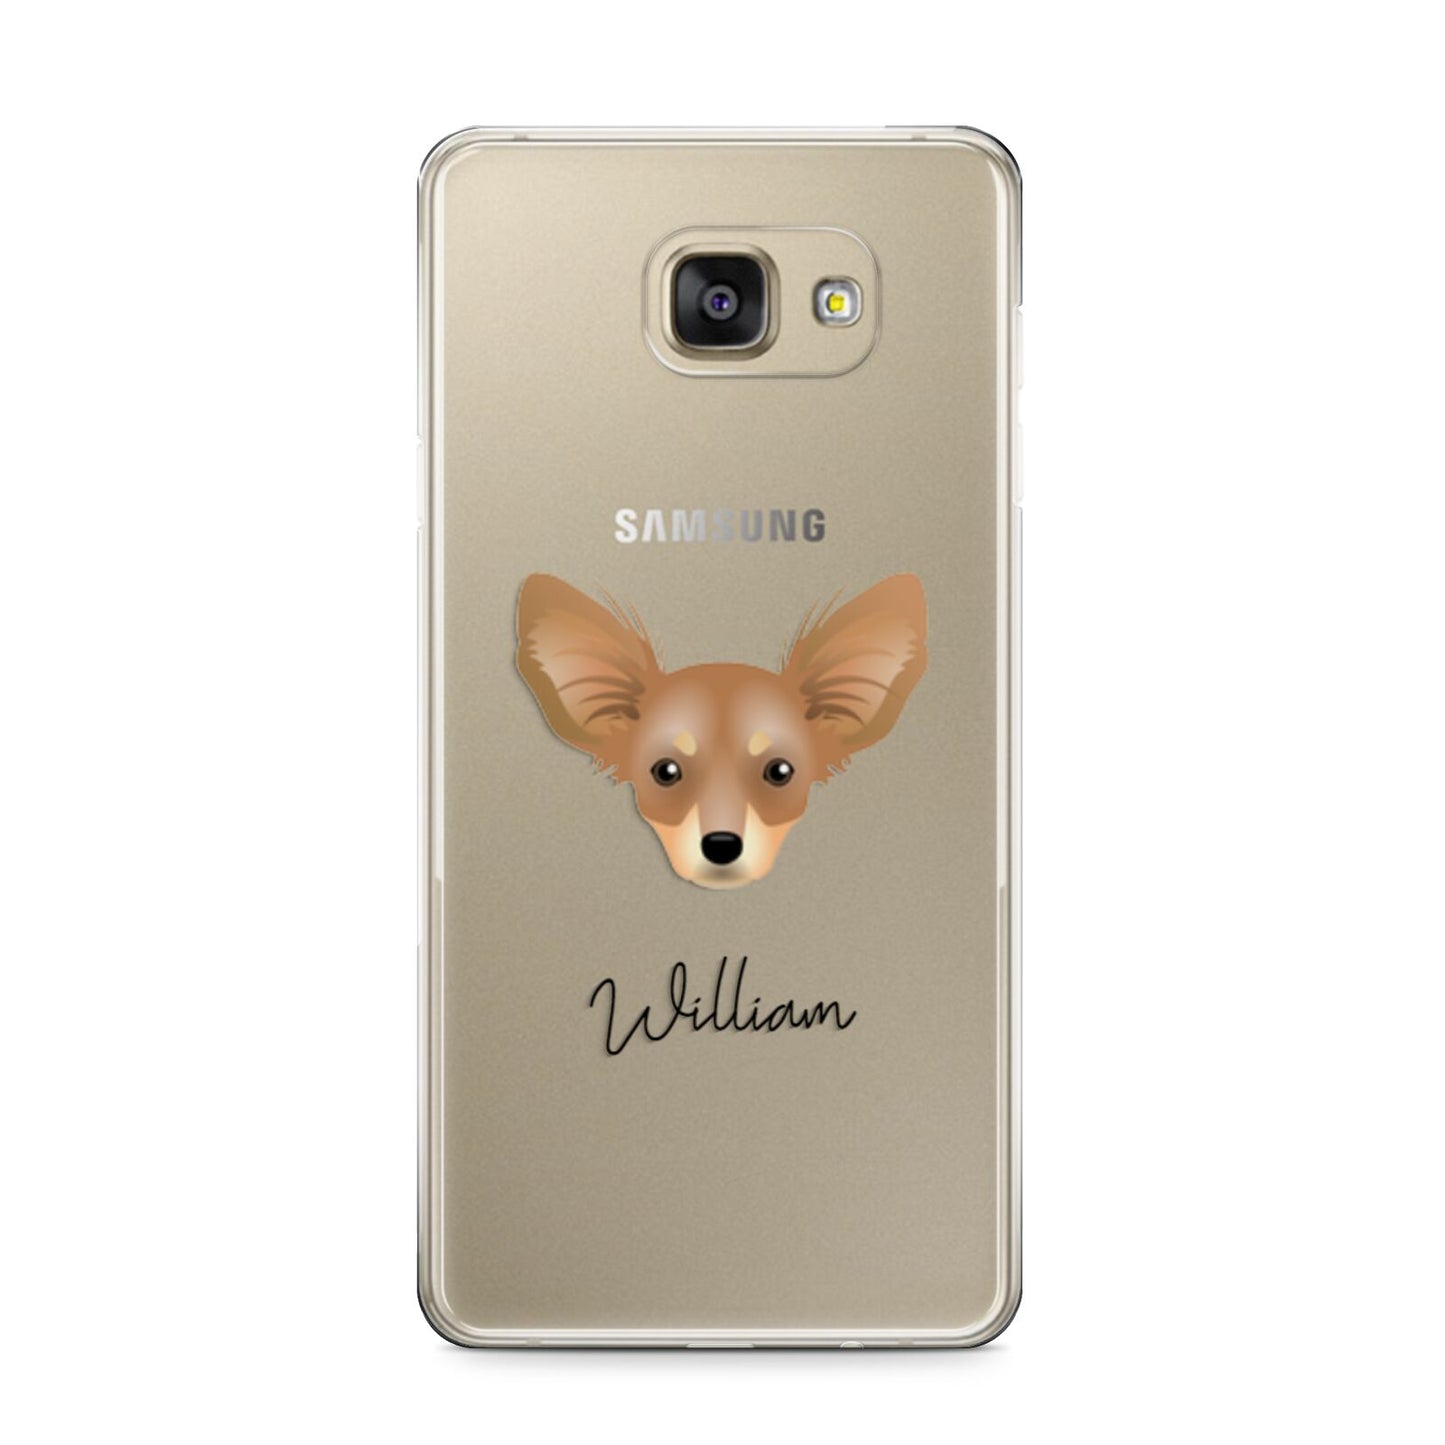 Russian Toy Personalised Samsung Galaxy A9 2016 Case on gold phone